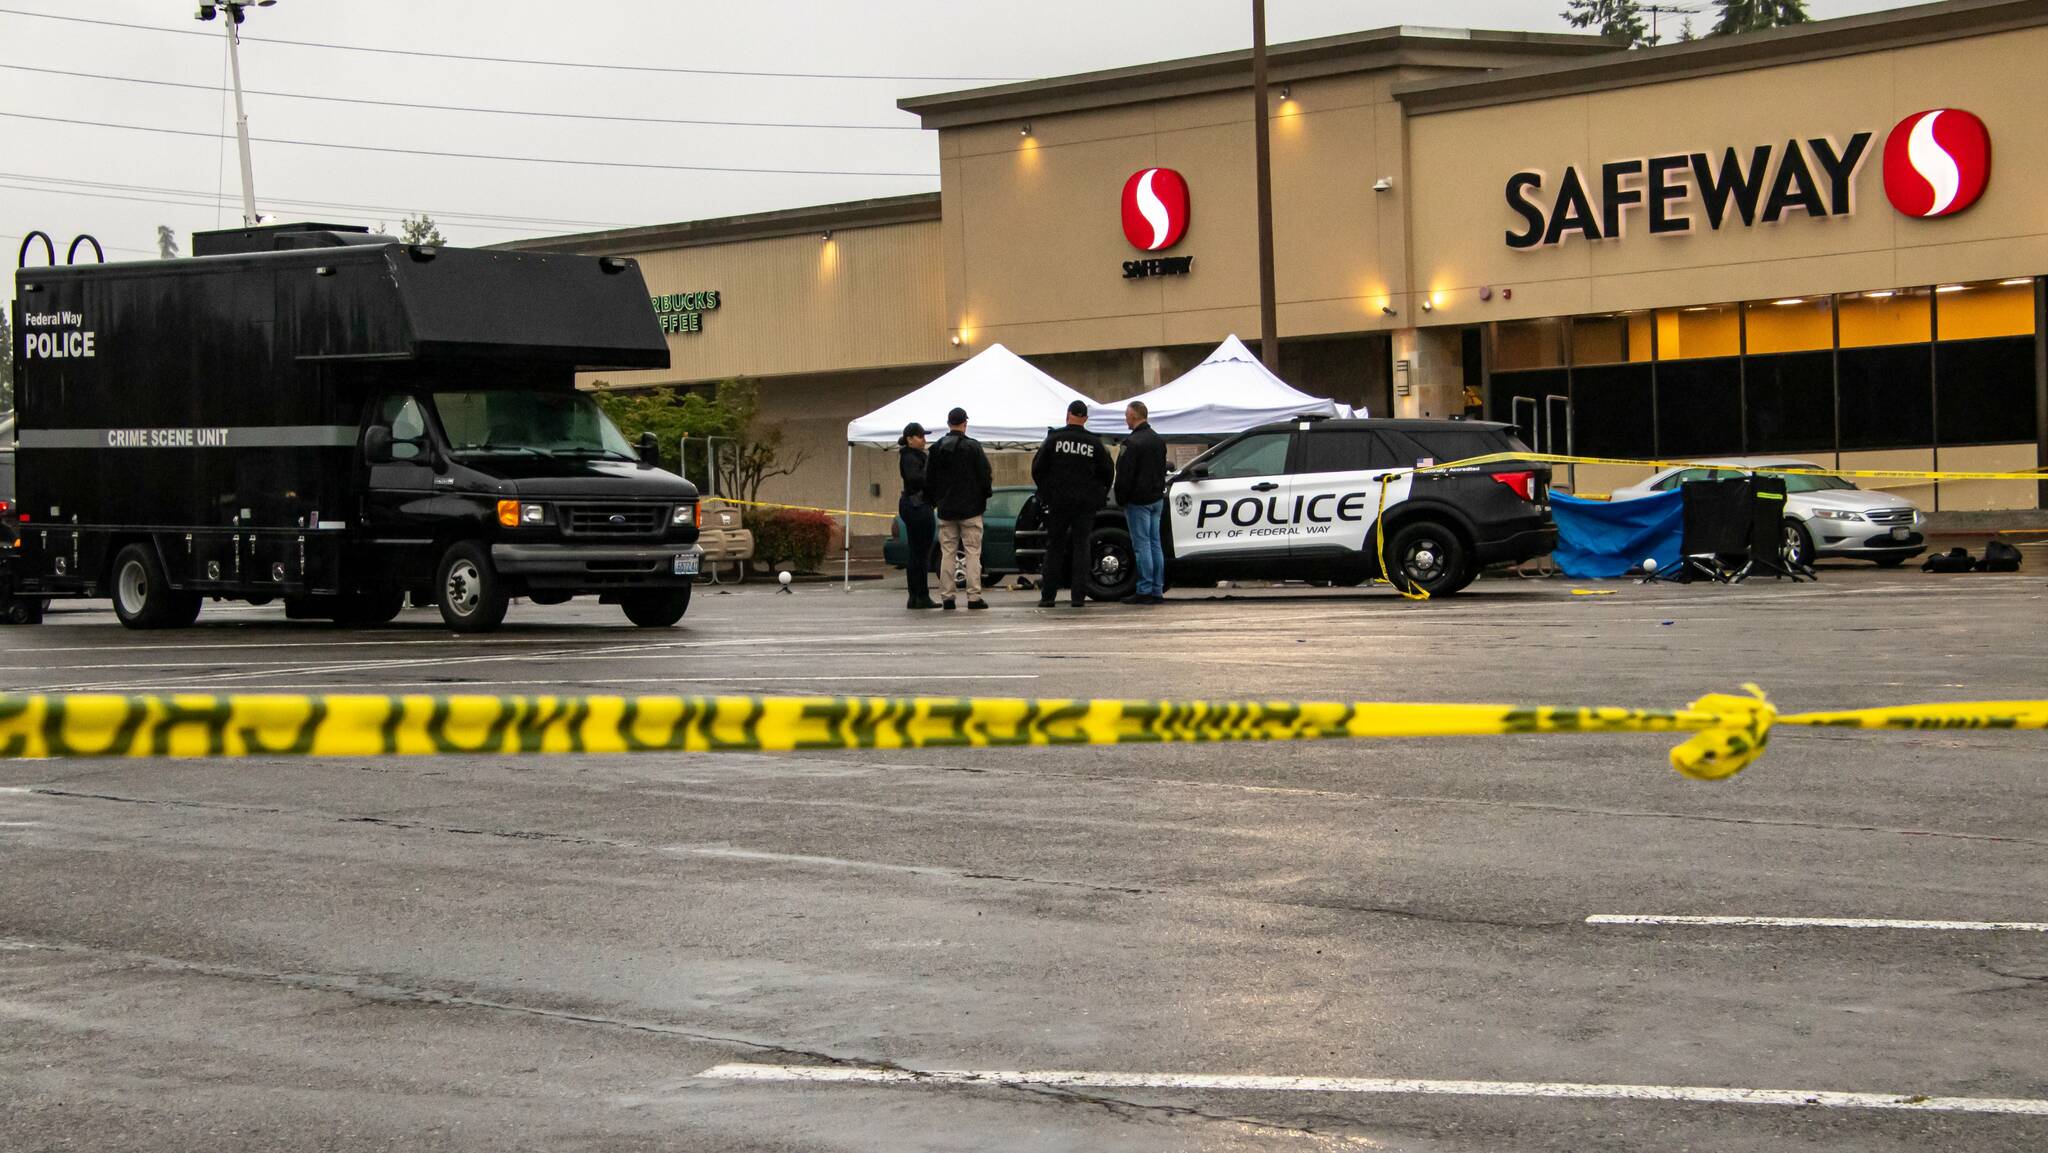 Police found several cartirdge casings in the Safeway parking lot on June 17 after the fatal shooting. Photo courtesy of South Sound News